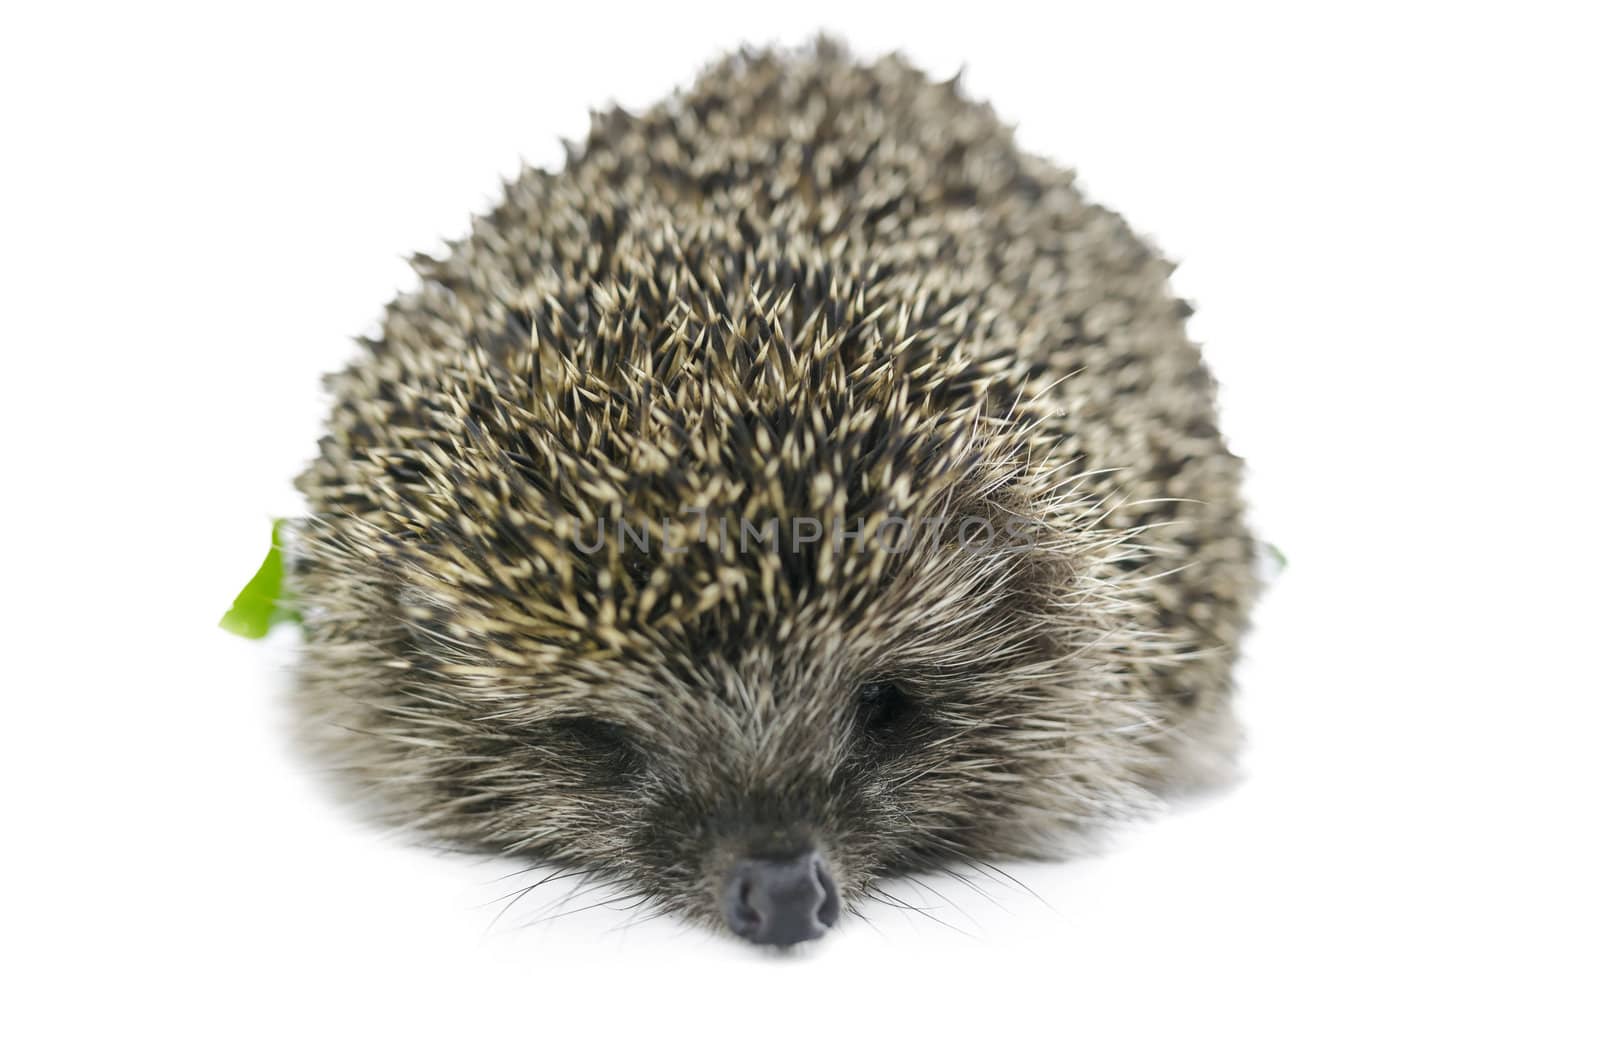 Front view of  hedgehog. Isolated over white background.